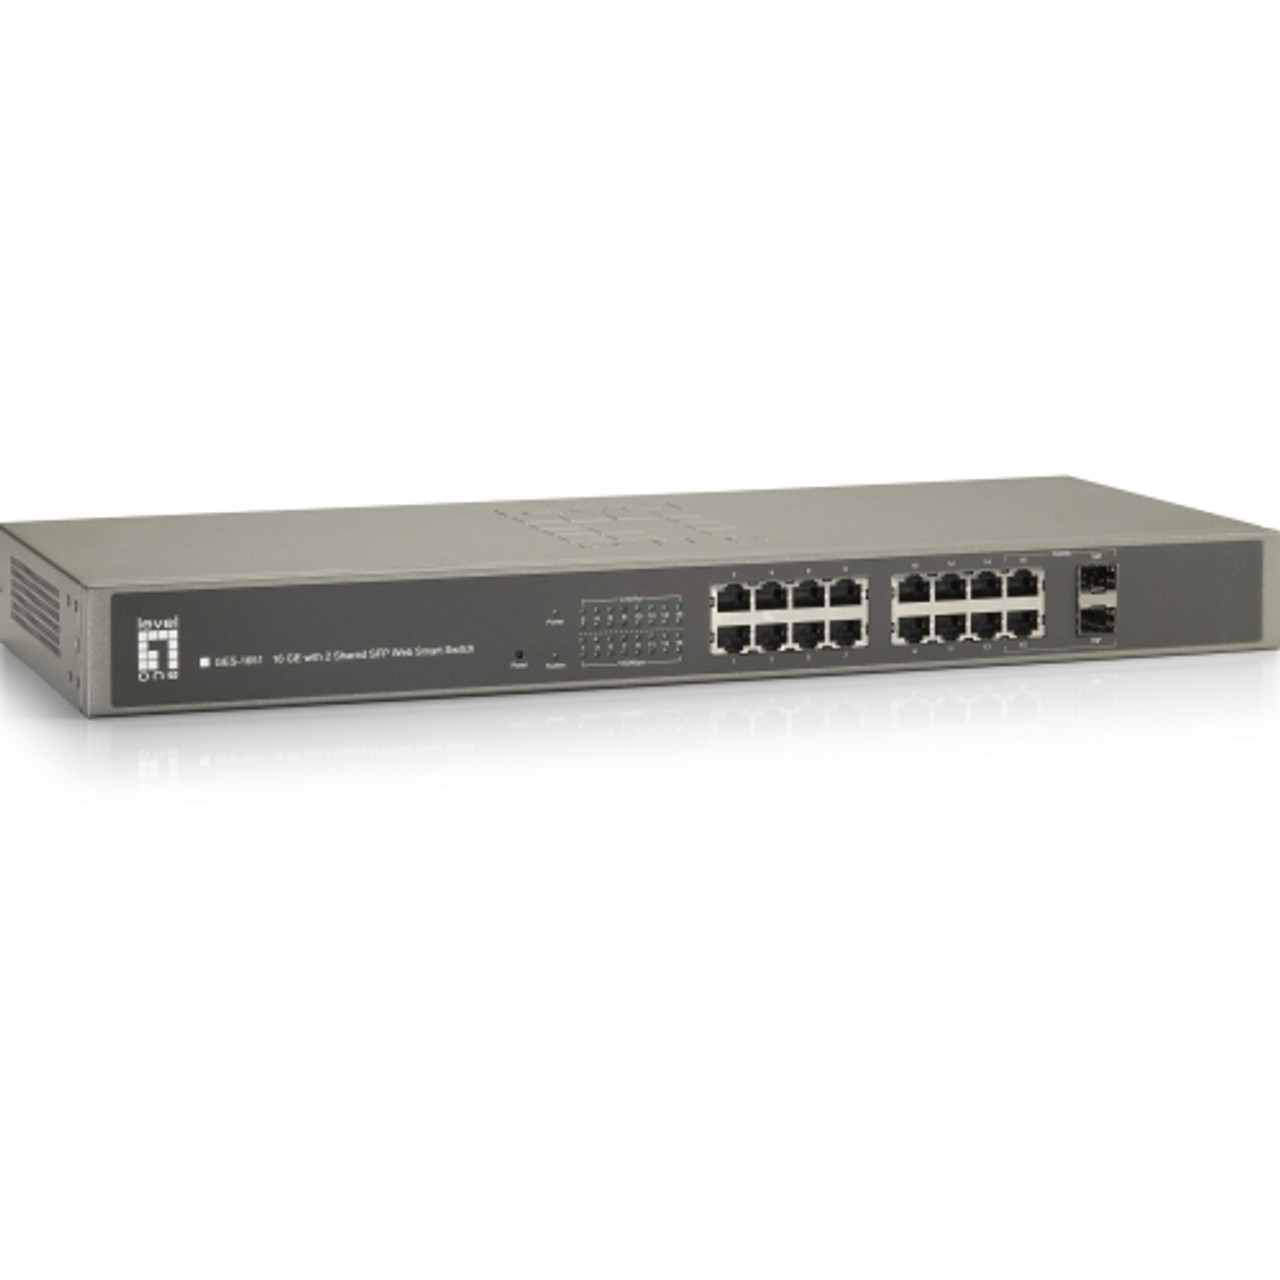 GES-1651 LevelOne 16 GE with 2 Shared SFP Web Smart Switch Manageable 2 Layer Supported Rack-mountable, Desktop (Refurbished)